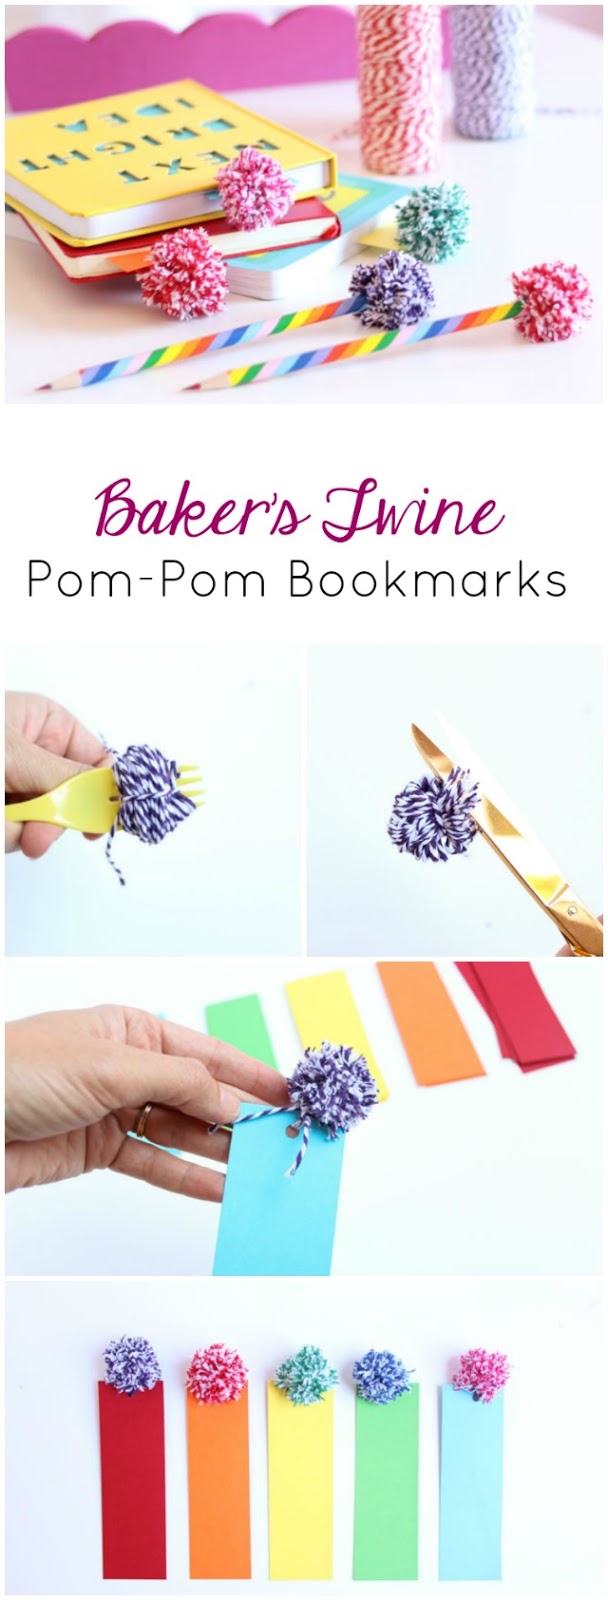 The cutest baker's twine pom-poms - perfect for bookmarks and pencil toppers!